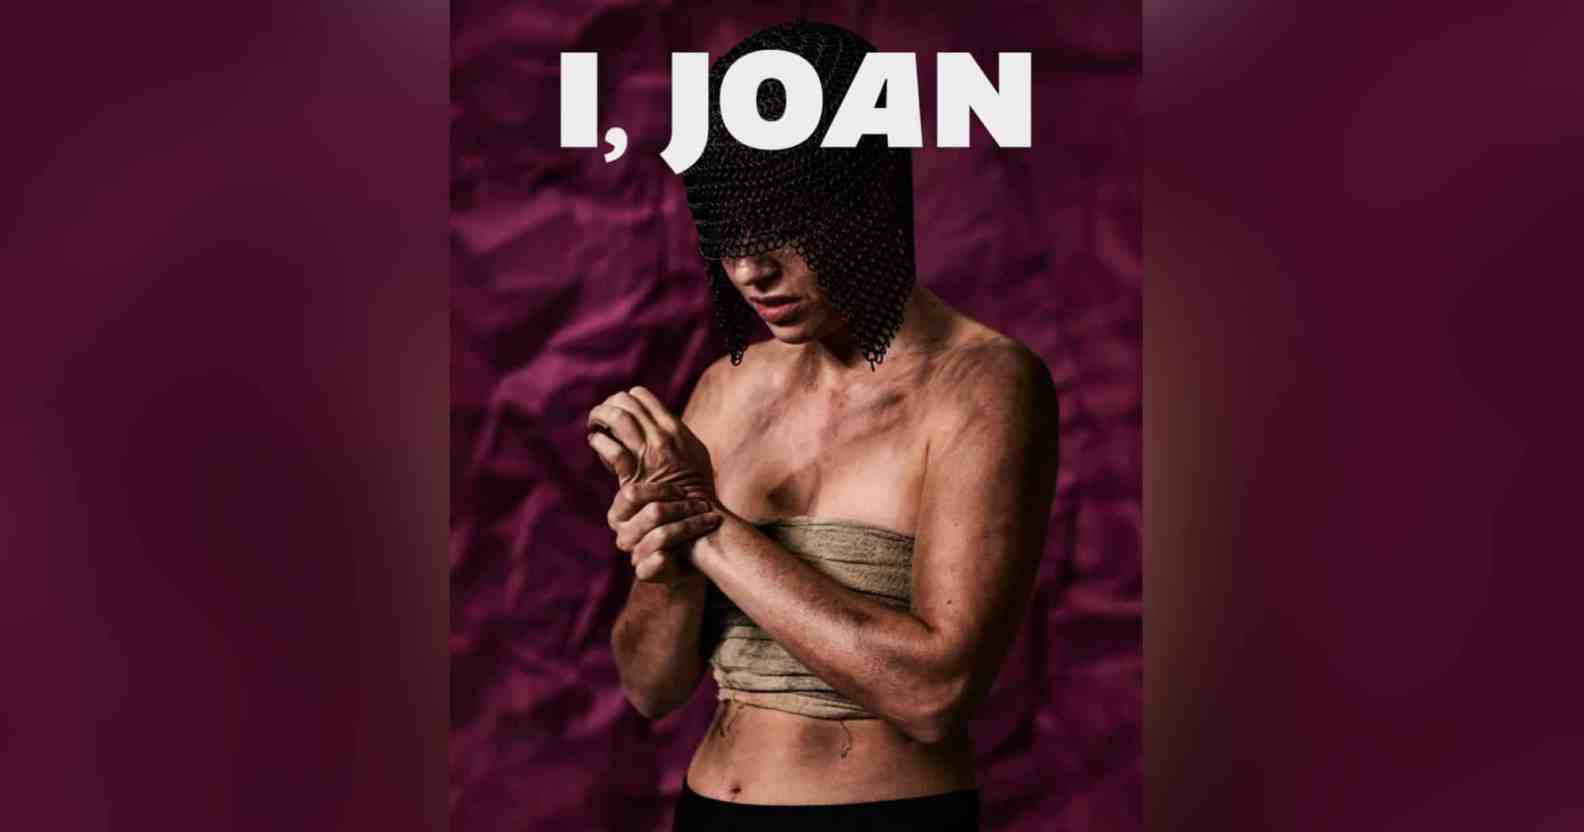 A graphic of a person who is covered in dirt and grime, their chest is bound and they wring their hands. A chainmail helmet covers their eyes. They stand in front of a purple background with text above their head reading I, JOAN in large white letters.